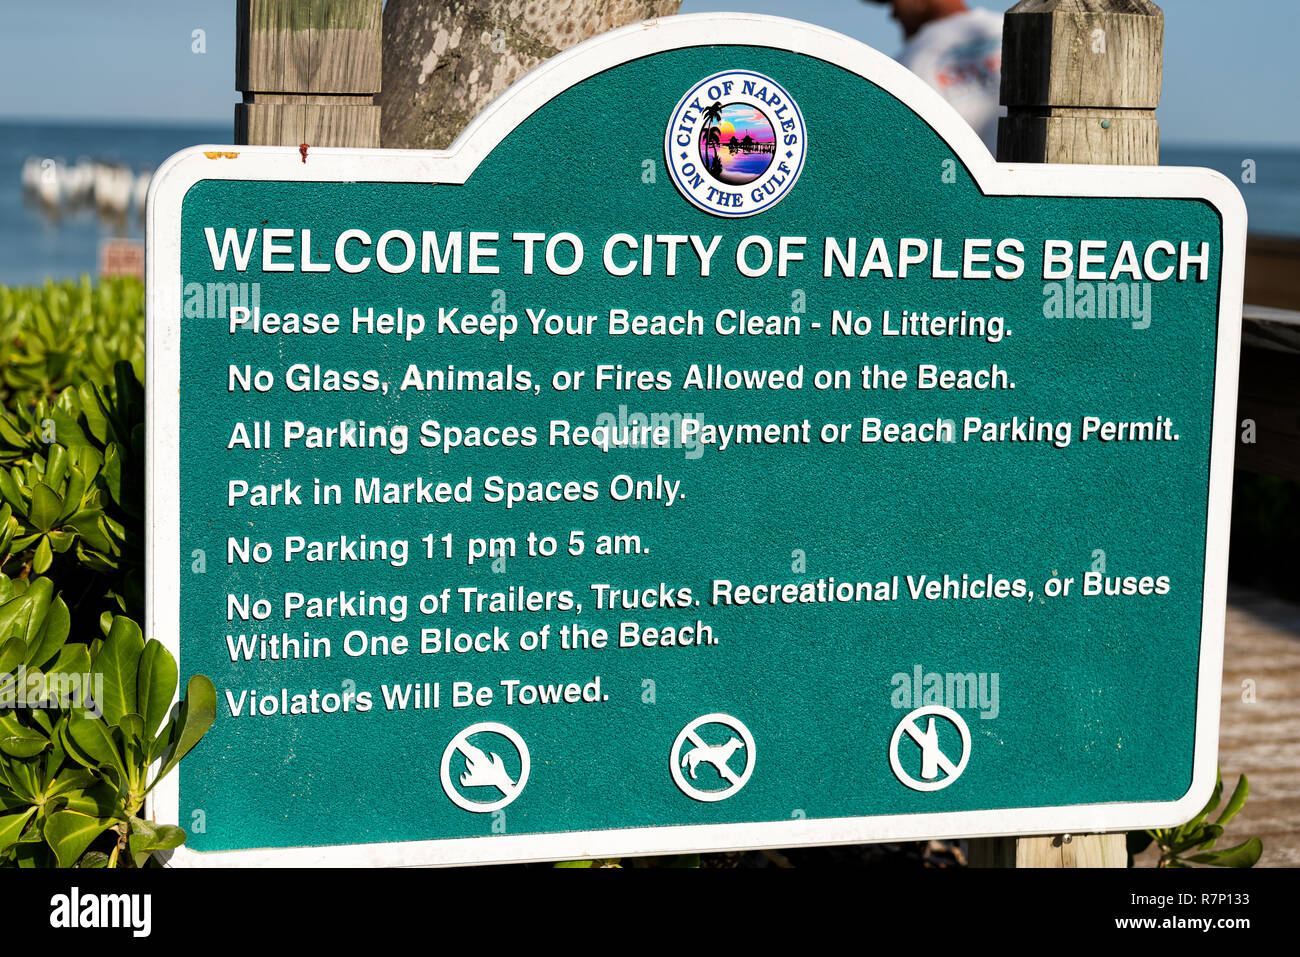 Beach Rules And Regulations Sign Stock Photos Beach Rules And